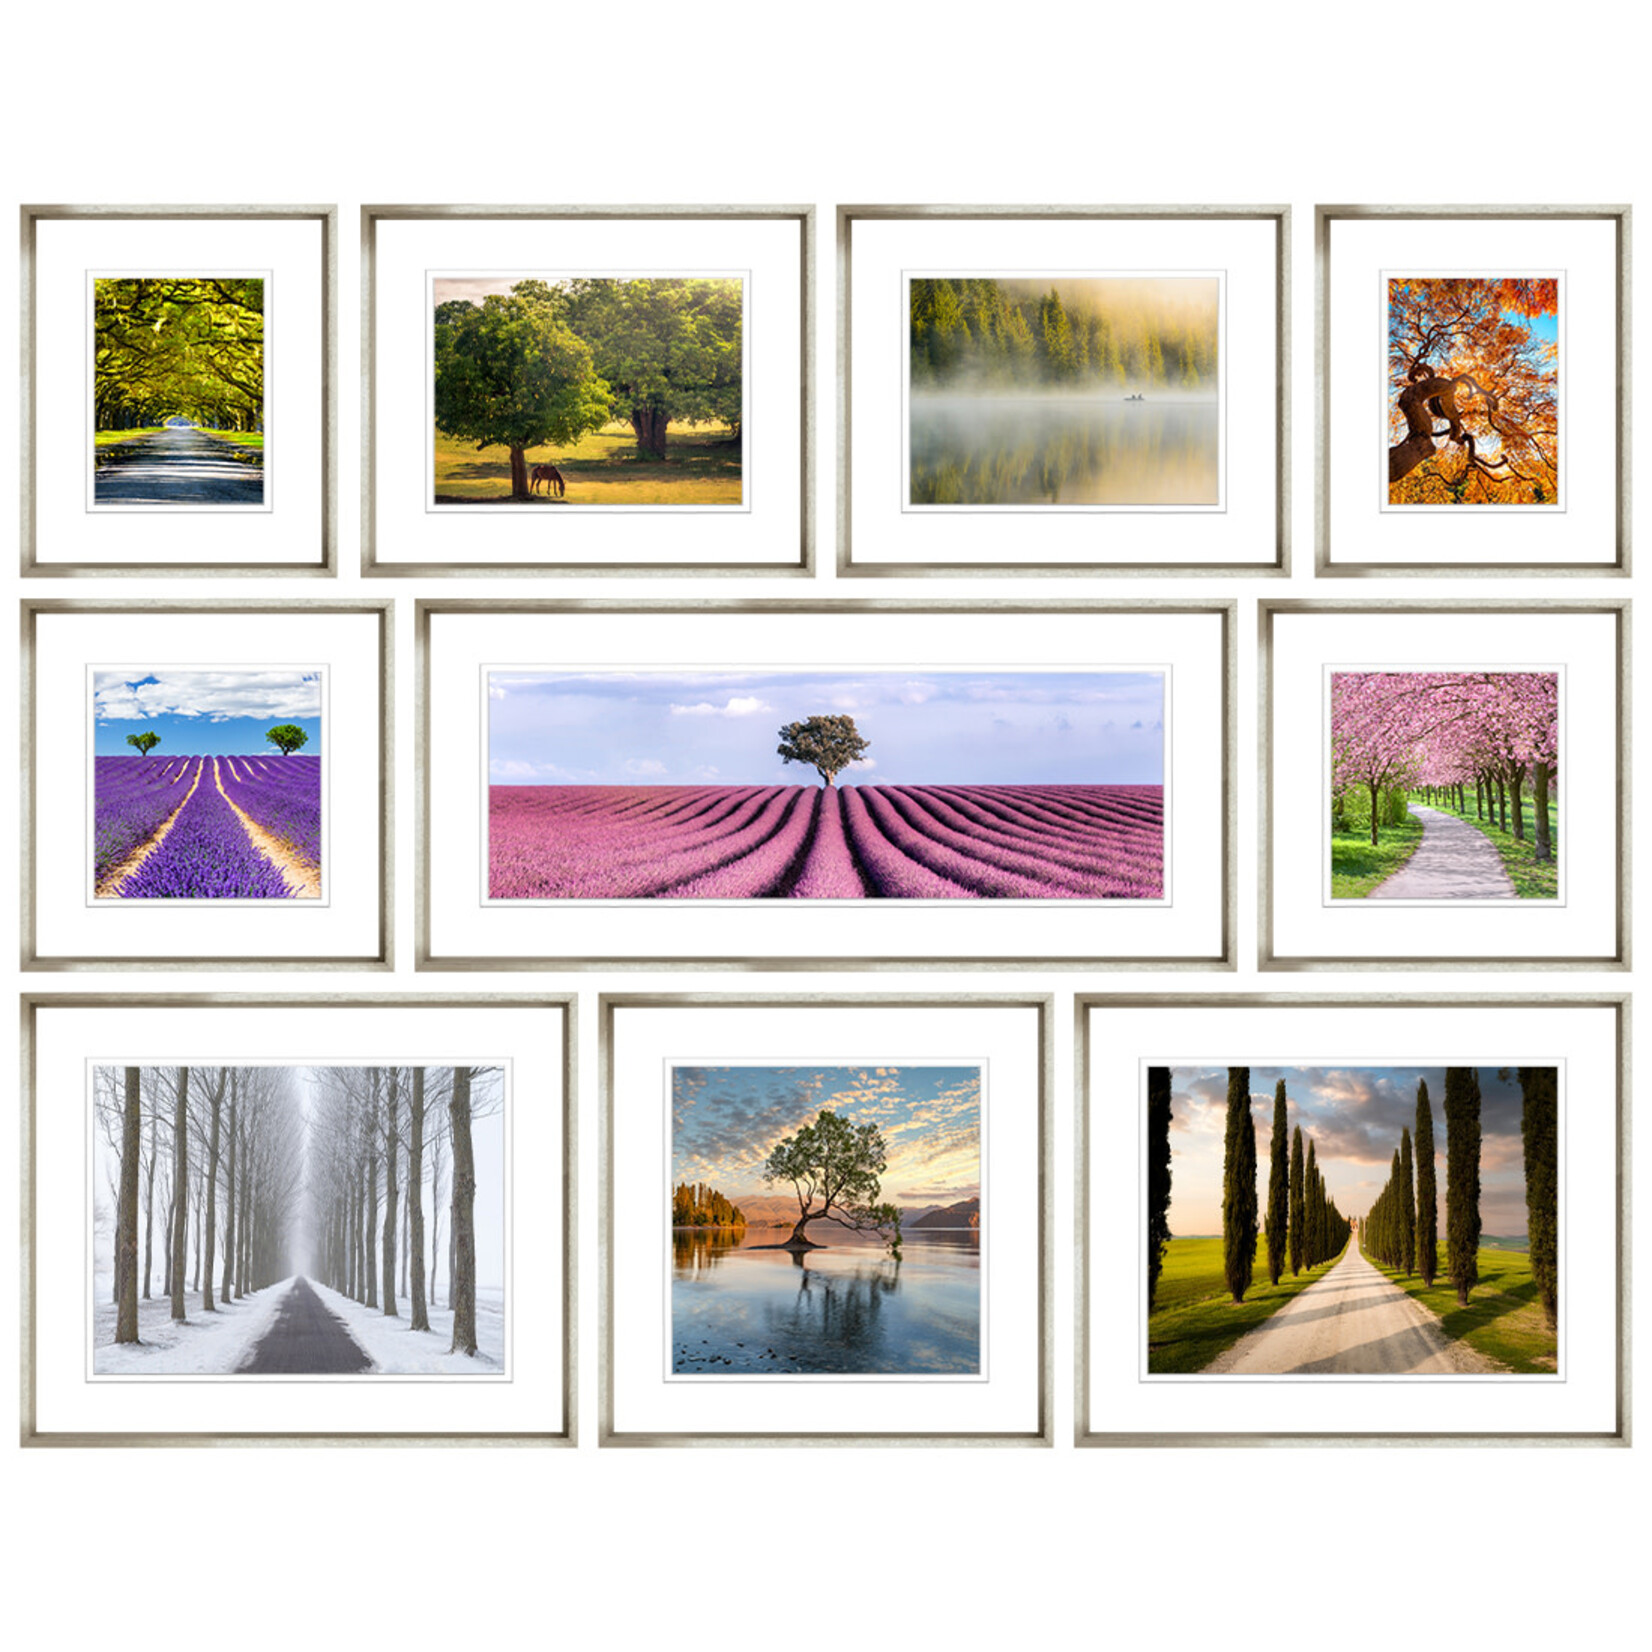 Trowbridge Gallery Colourful Tree Collection Winter Tree Line Framed Artwork 8